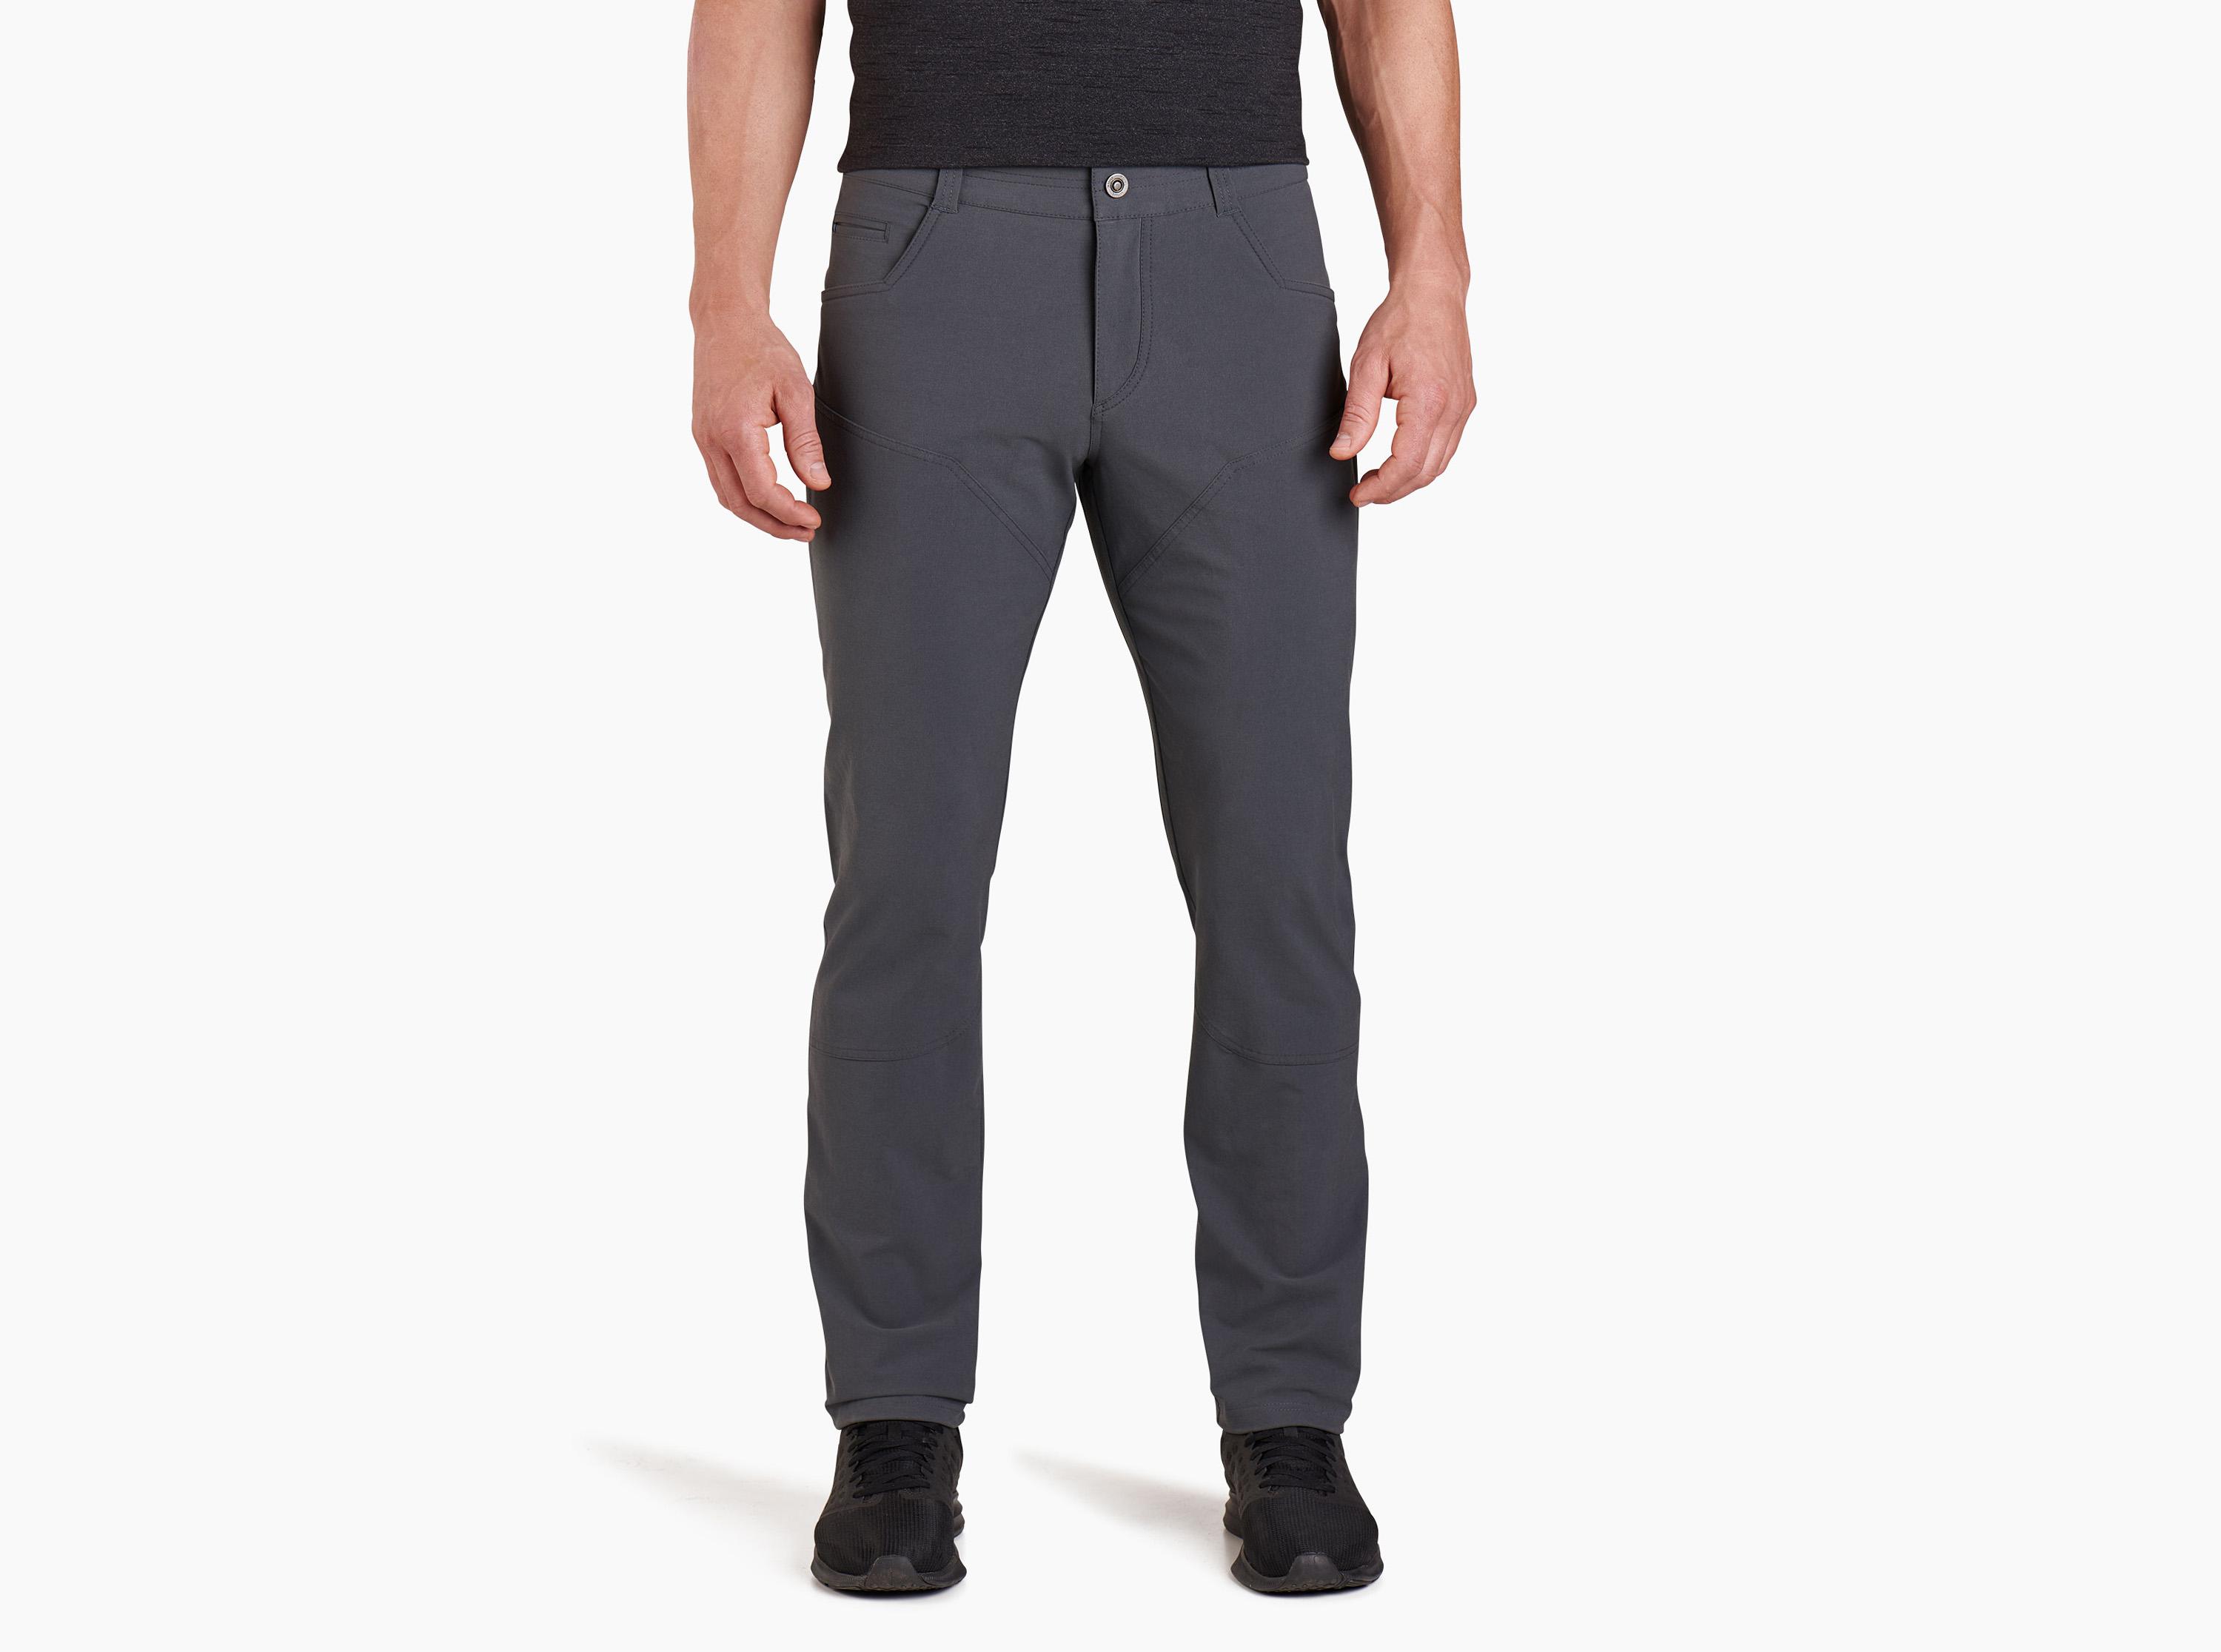 Are The Kühl Resistor Chino Pants The Best Stretchy Pants For Men? | The  Backpack Guide